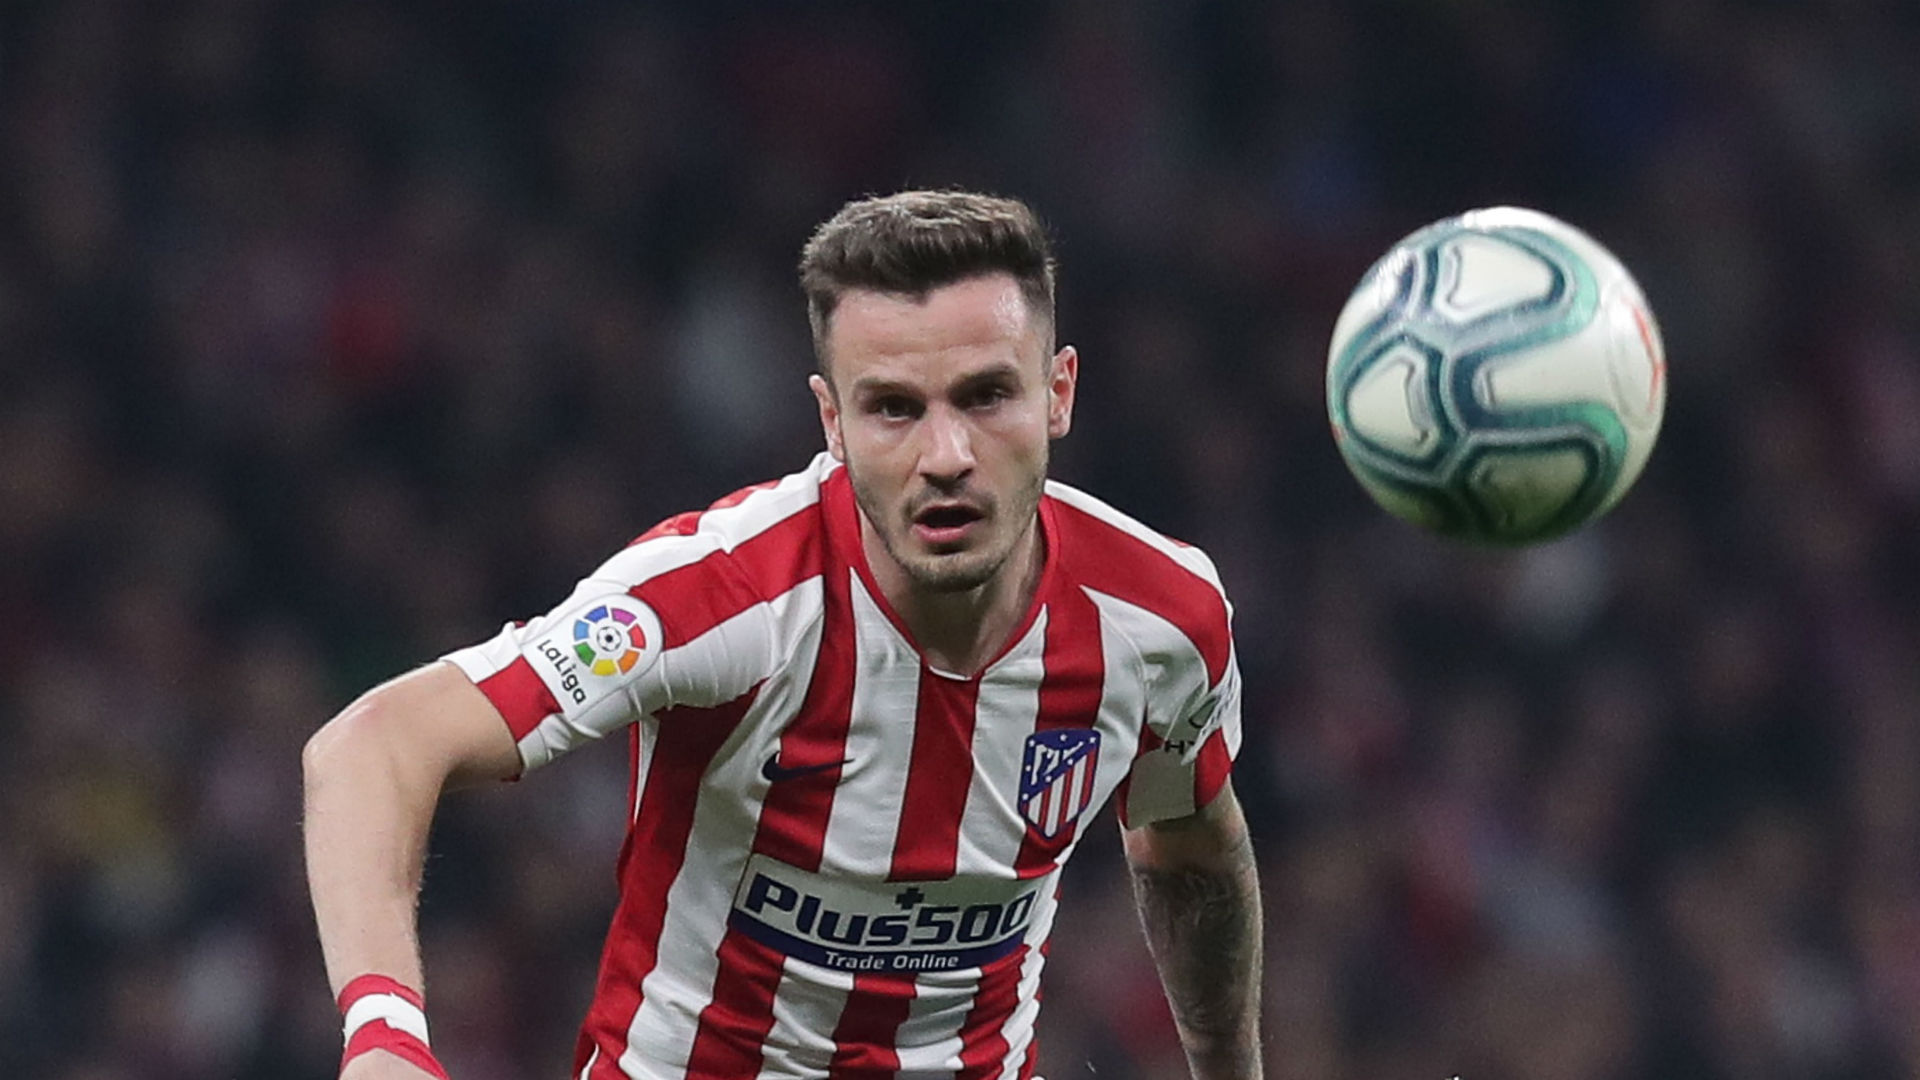 It seems unlikely Saul Niguez will announce his exit from Atletico Madrid on Wednesday, but who would be interested in signing him?